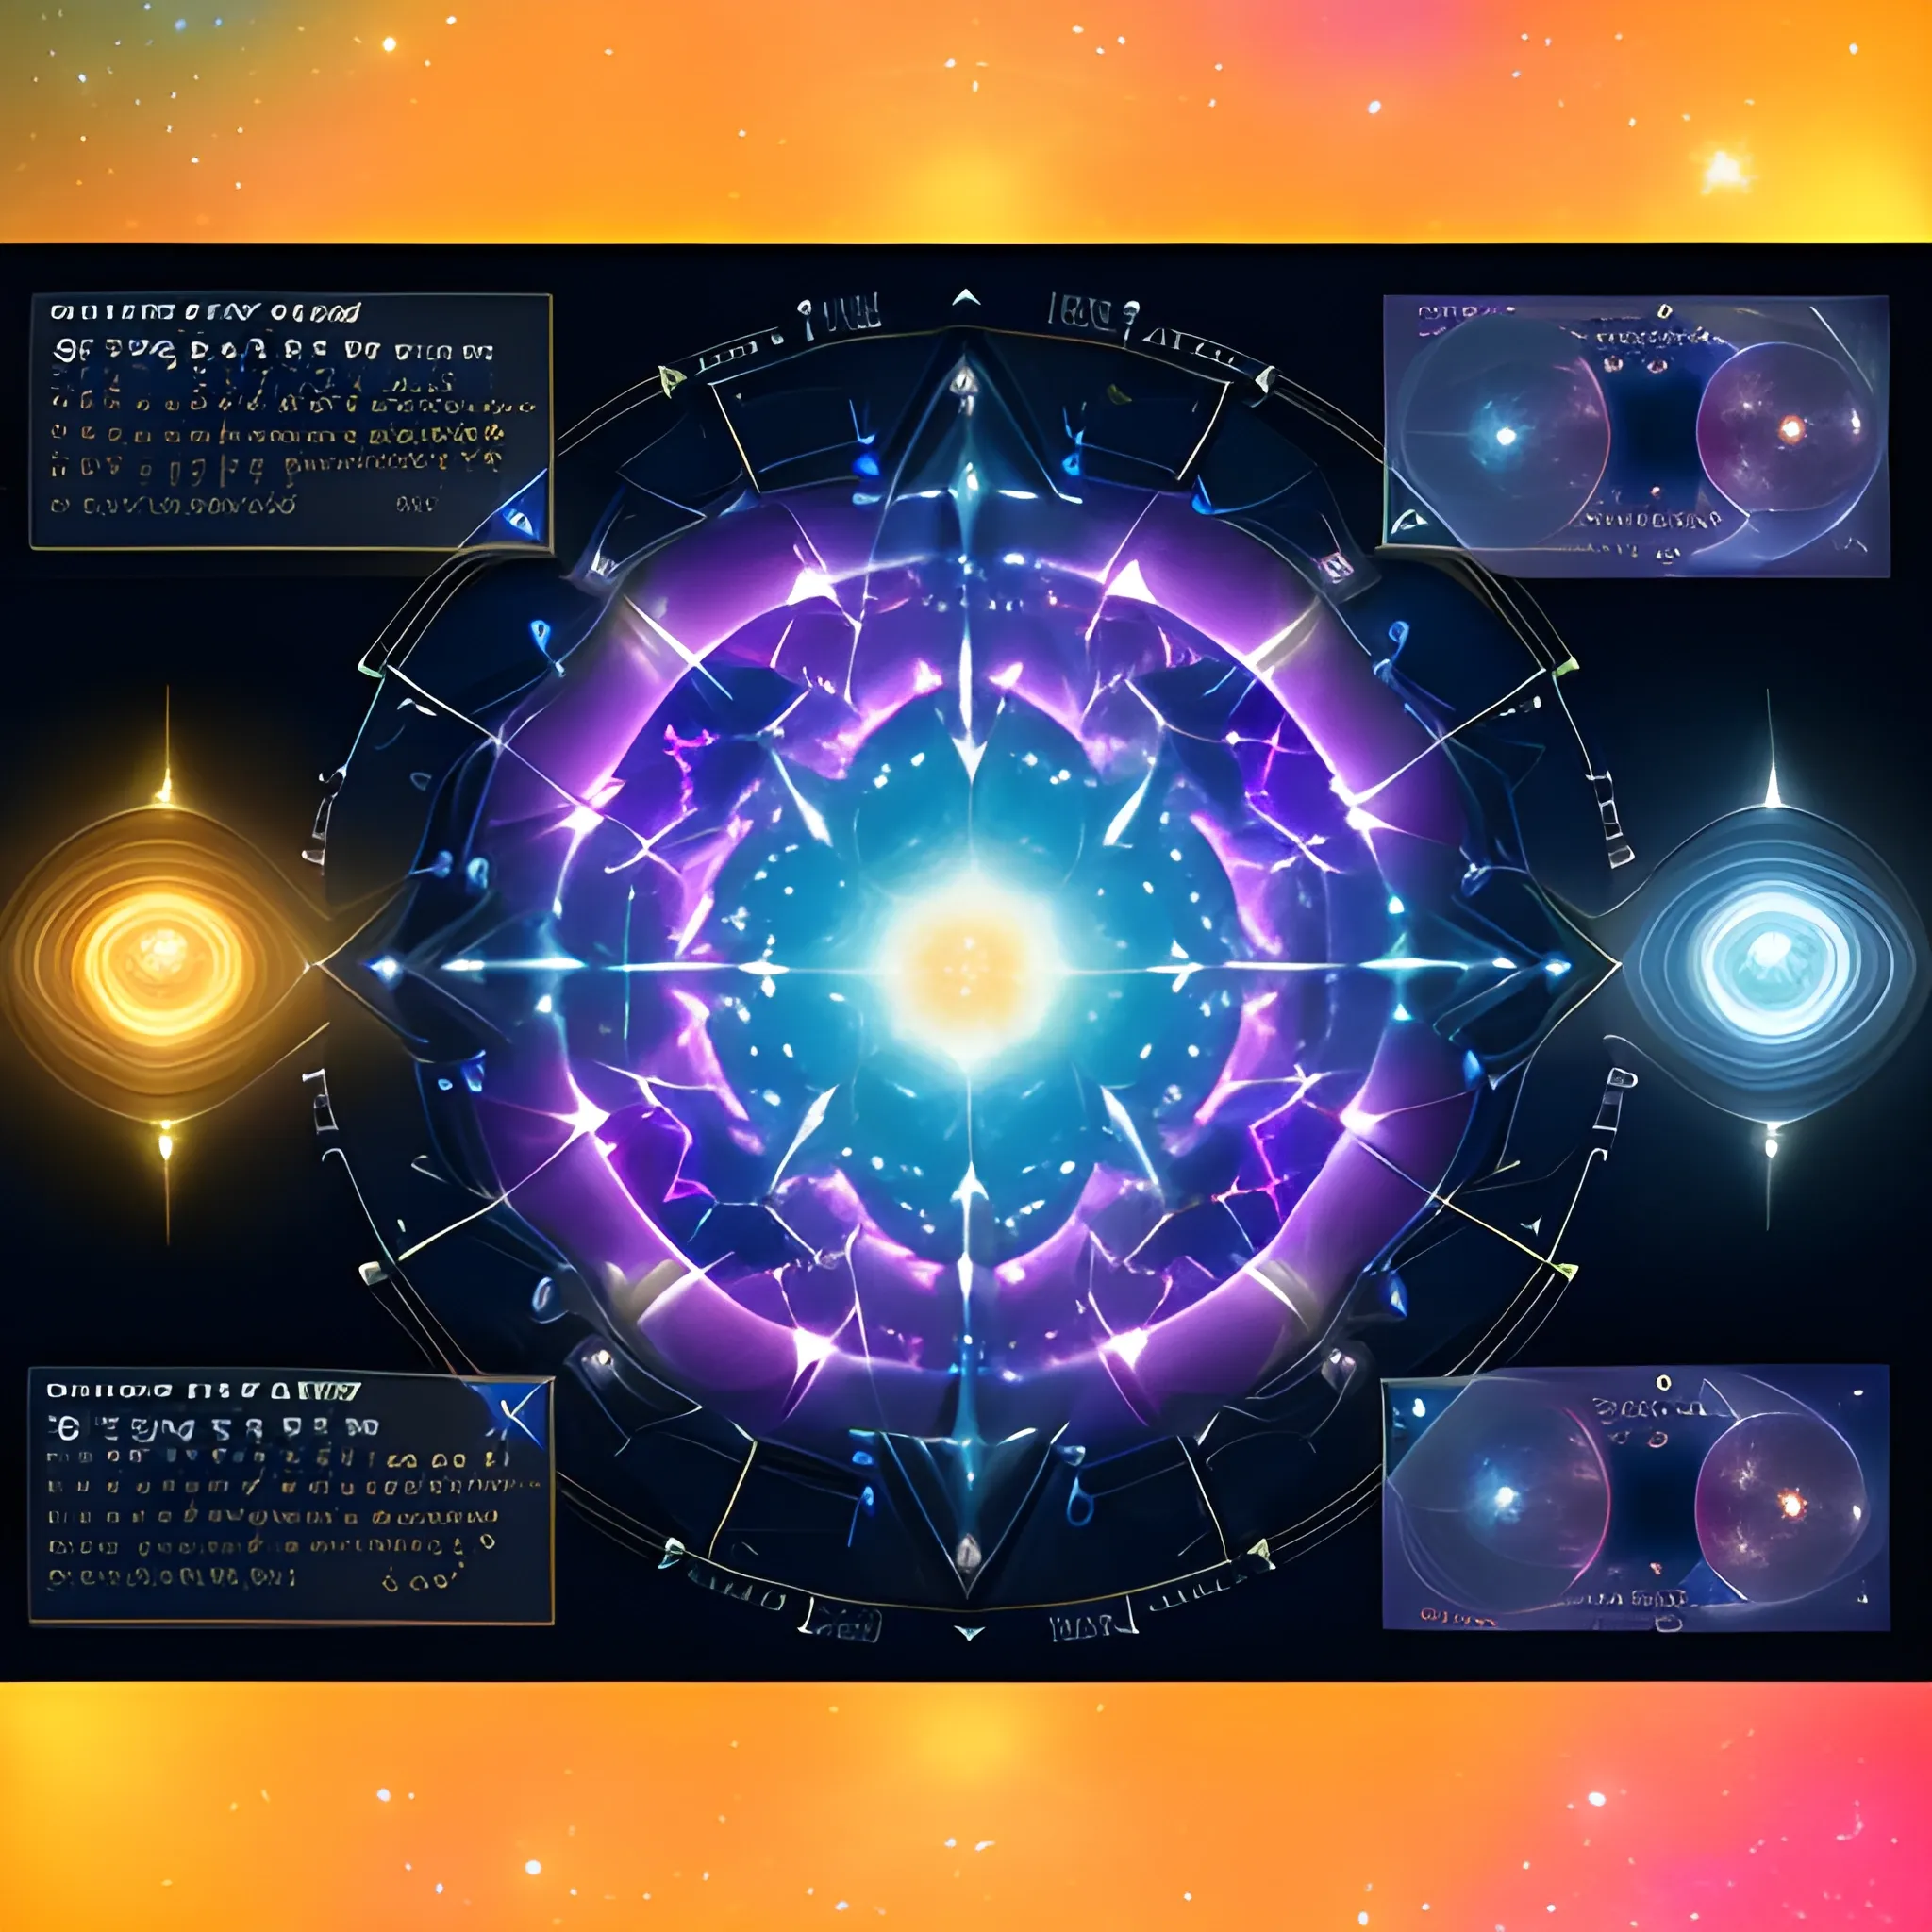 "Mysterious Radiance," "Star Map Guidance," "Cosmic Brilliance," "Cinematic Glow, Shimmering Lights," "3D Style, Sci-Fi Anime"
"width": 960, "height": 540, "seed": "566136464", step:"60", "version": "SH_Deliberate"